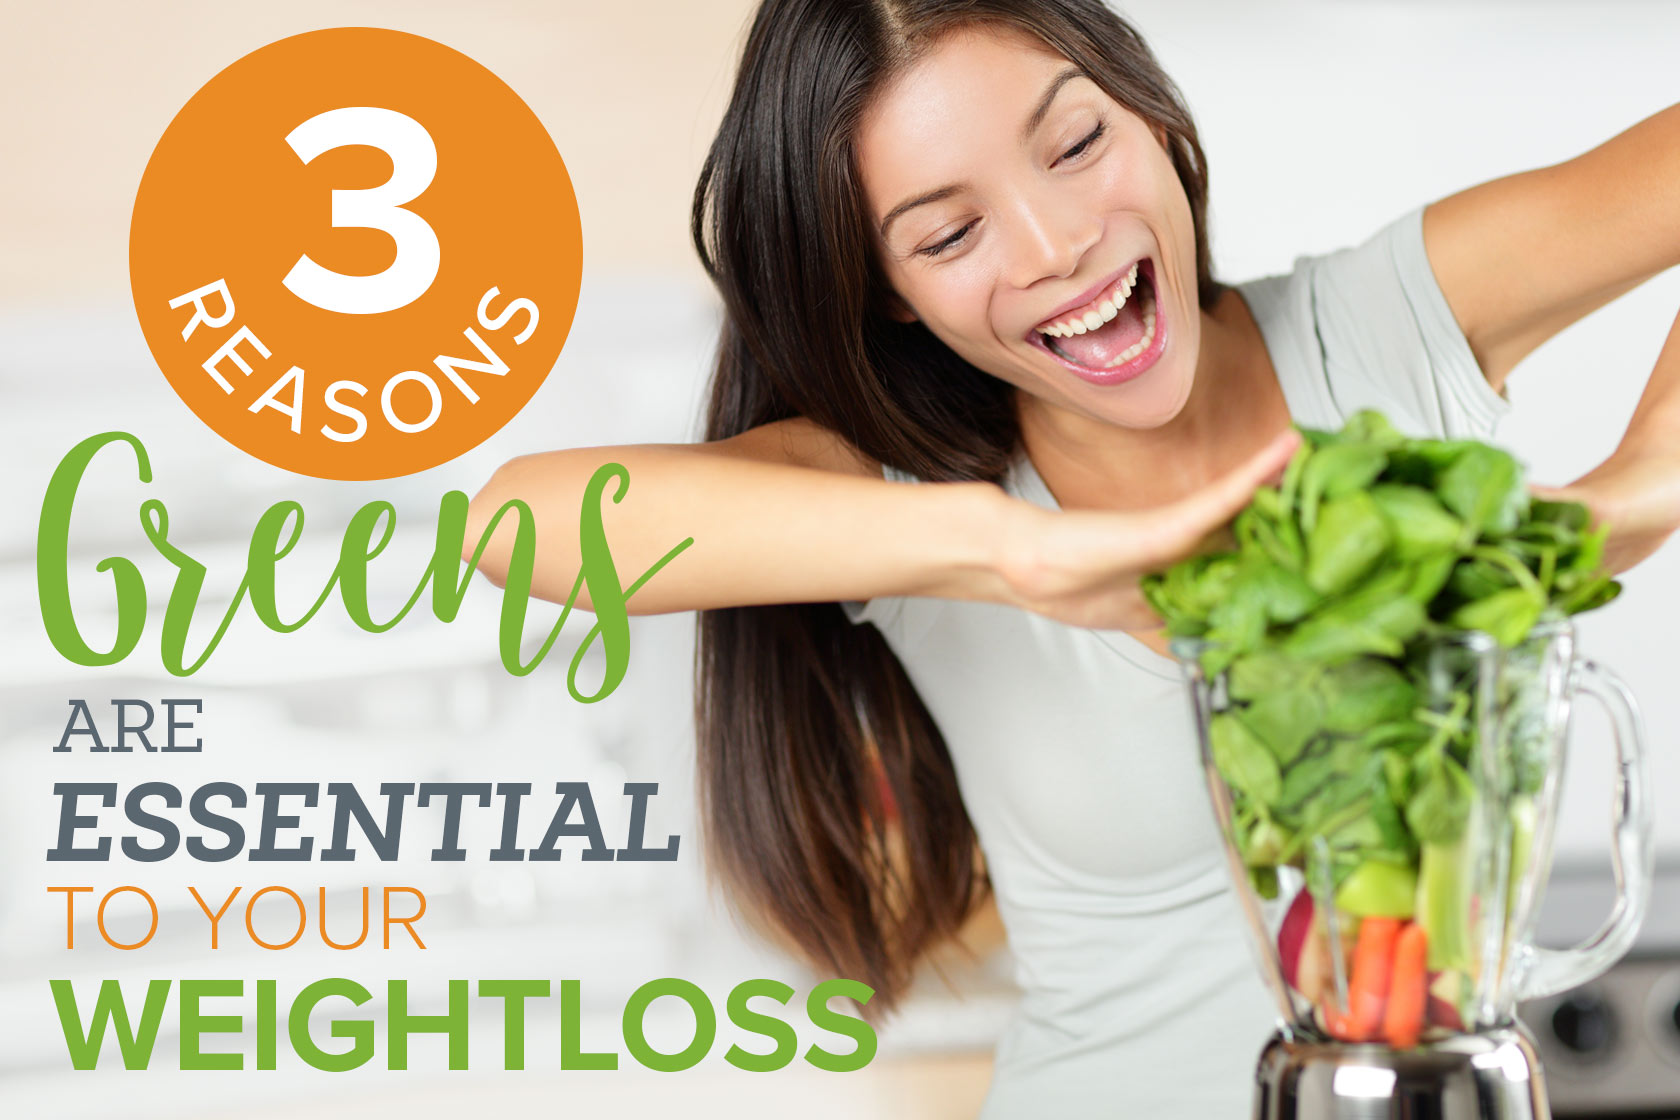 oxyfresh greens are essential to weight-loss shake main